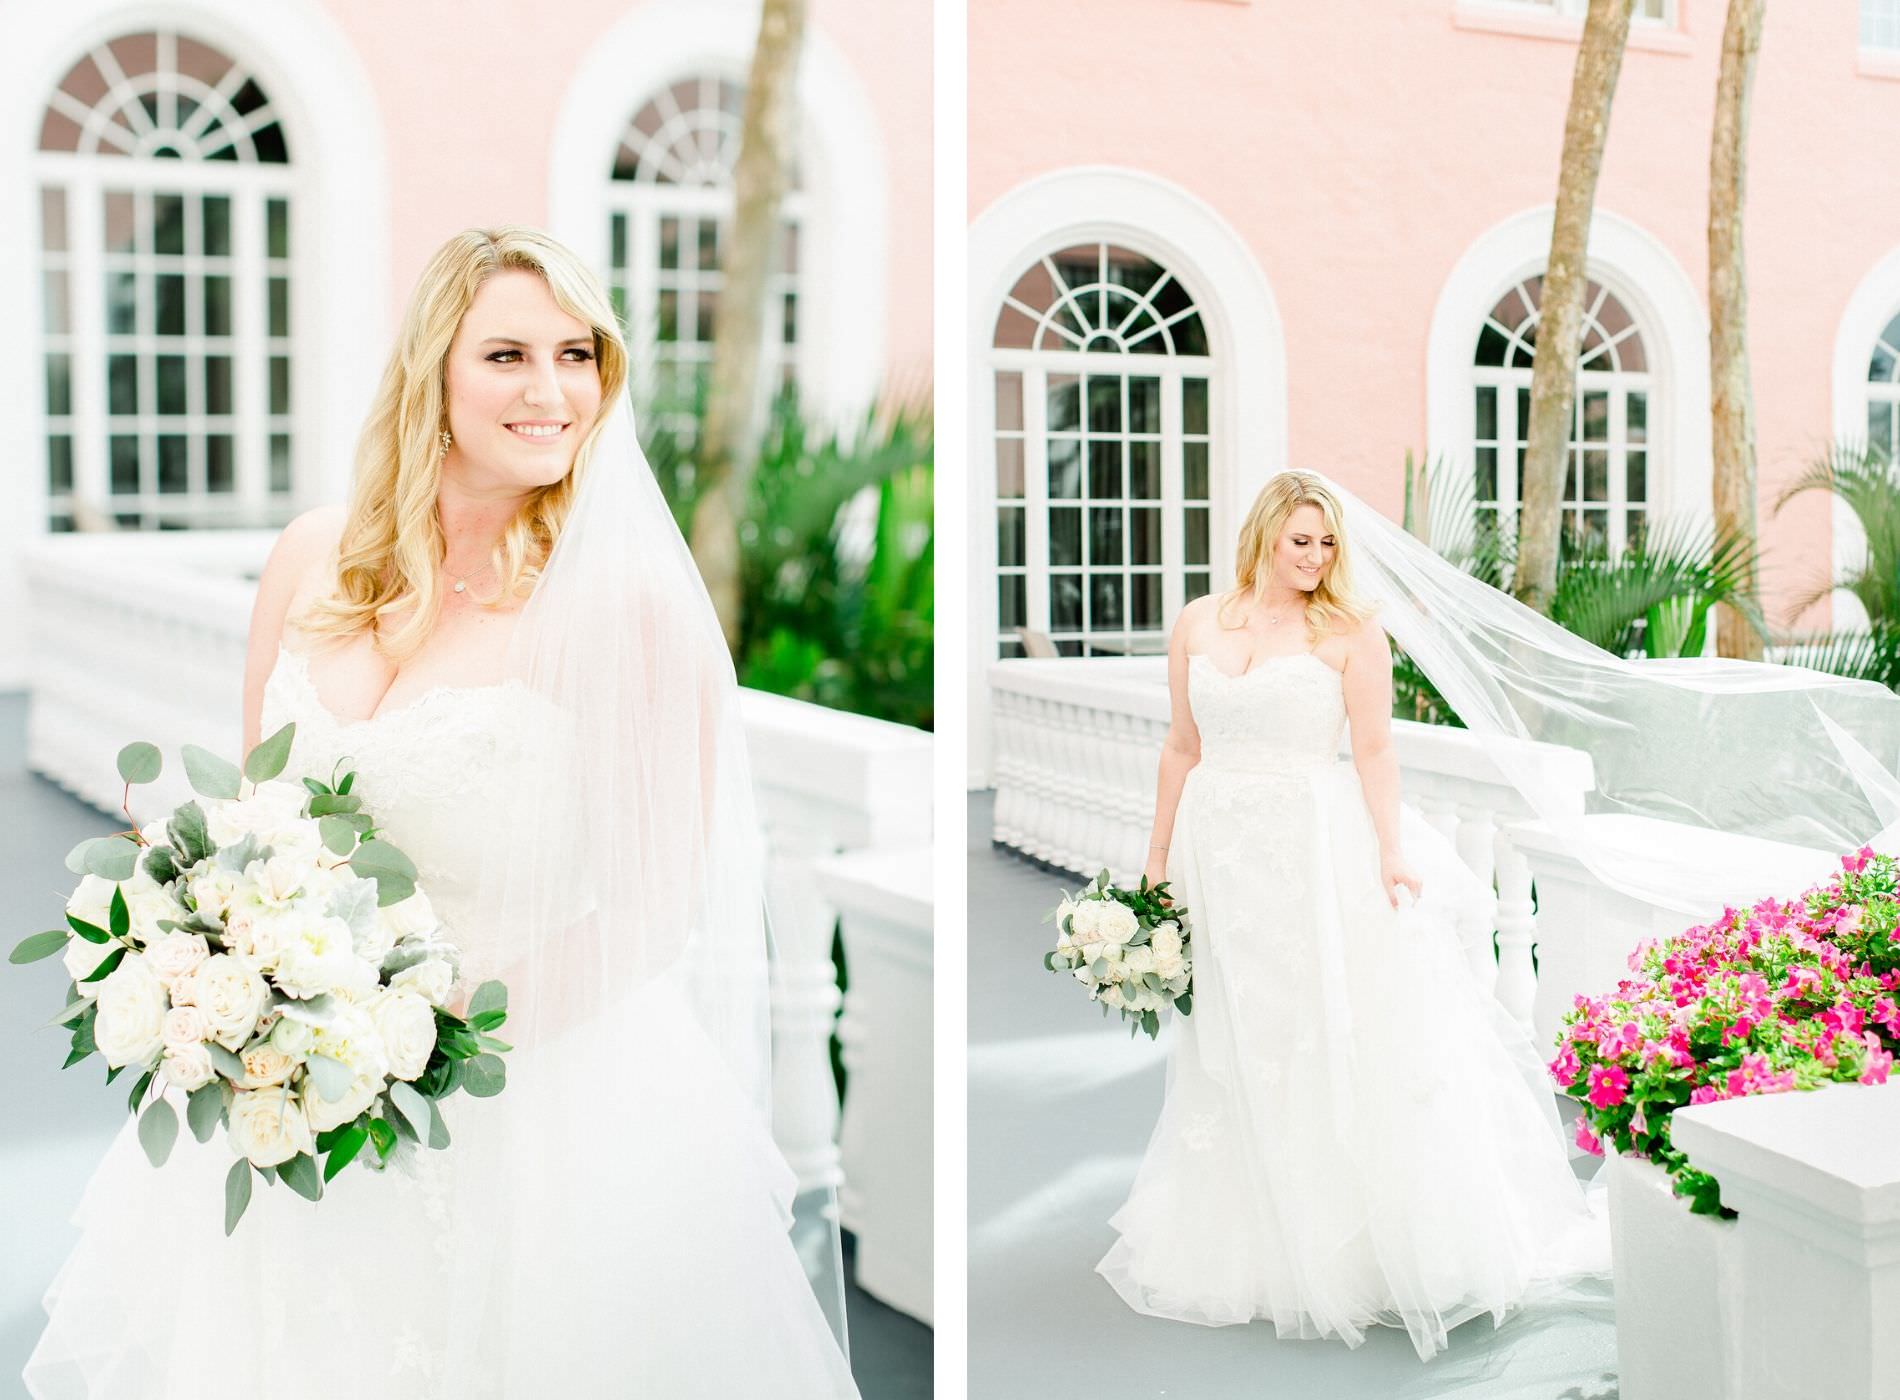 Ivory Bridal Gown Strapless Lace Sweetheart Tulle Organza Tiered Ballgown Wedding Dress | Long Cathedral Veil | St Pete Beach Wedding Venue The Don Cesar | Classic Greenery White Flowers Bouquets | Isabel O'Neil Bridal Collection | Bella Bridesmaids